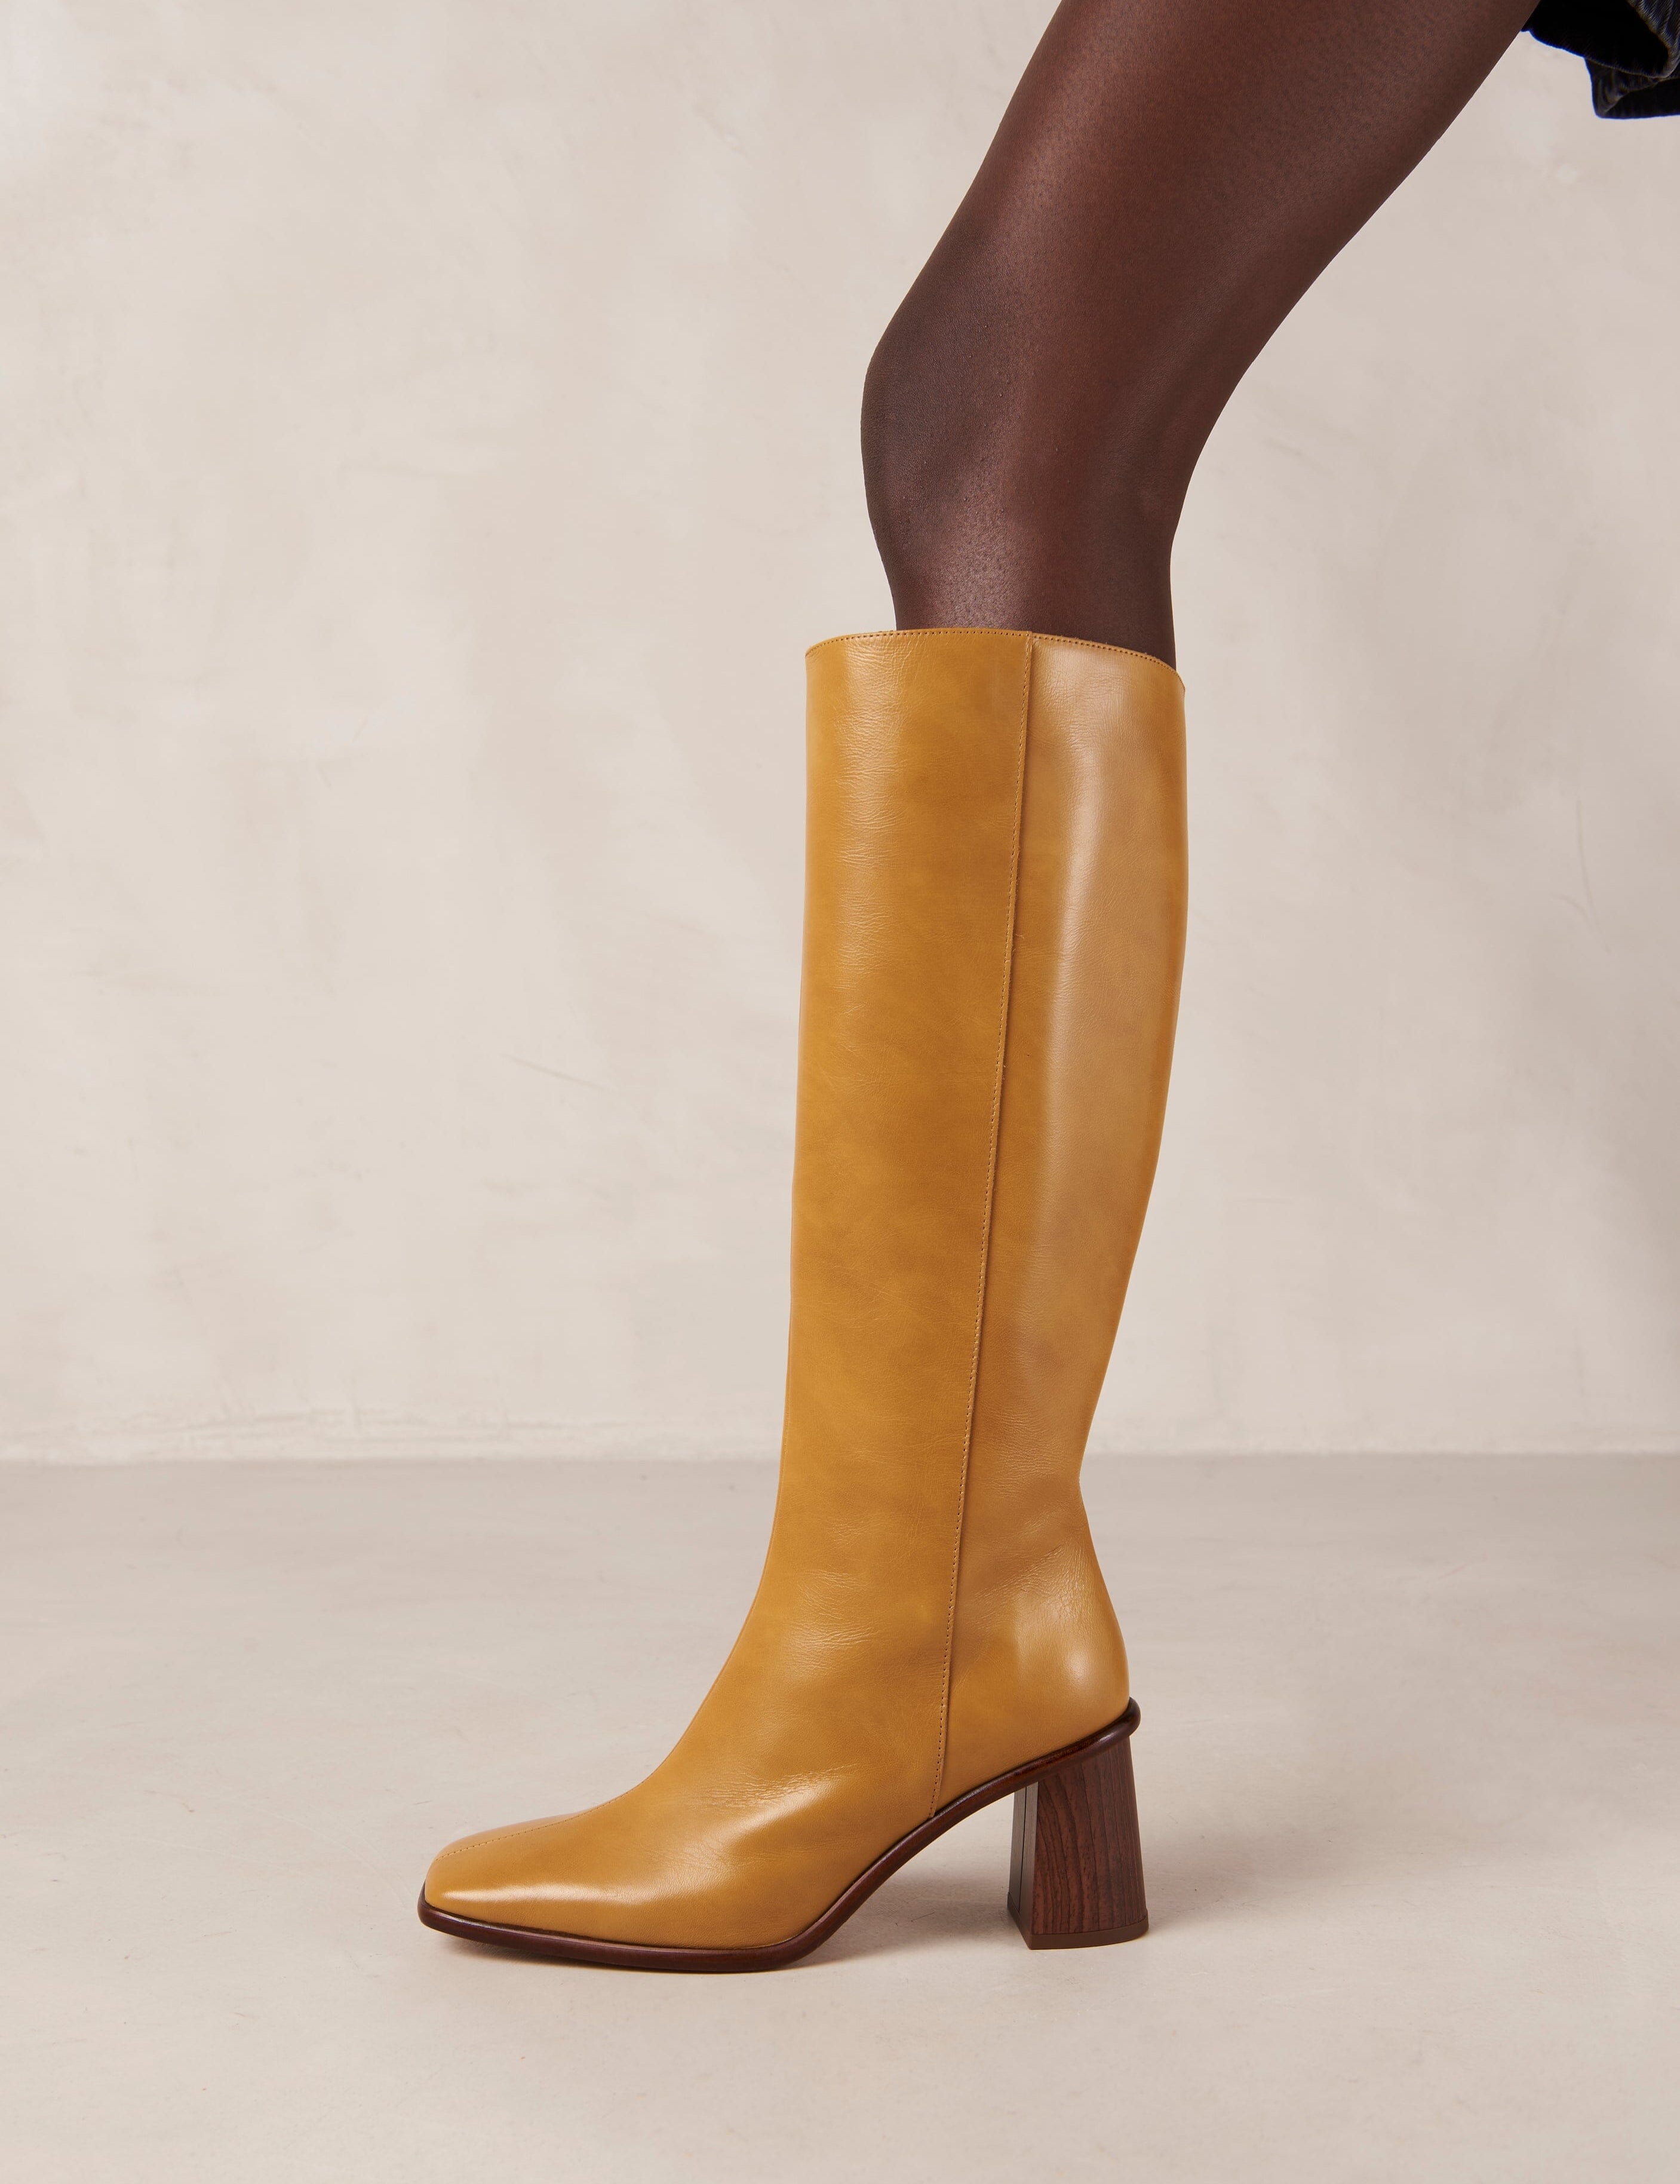 east-marigold-yellow-leather-boots-boots-alohas-359852_3000x_812a3123-767f-443c-9d08-3bba6ed48116.jpg